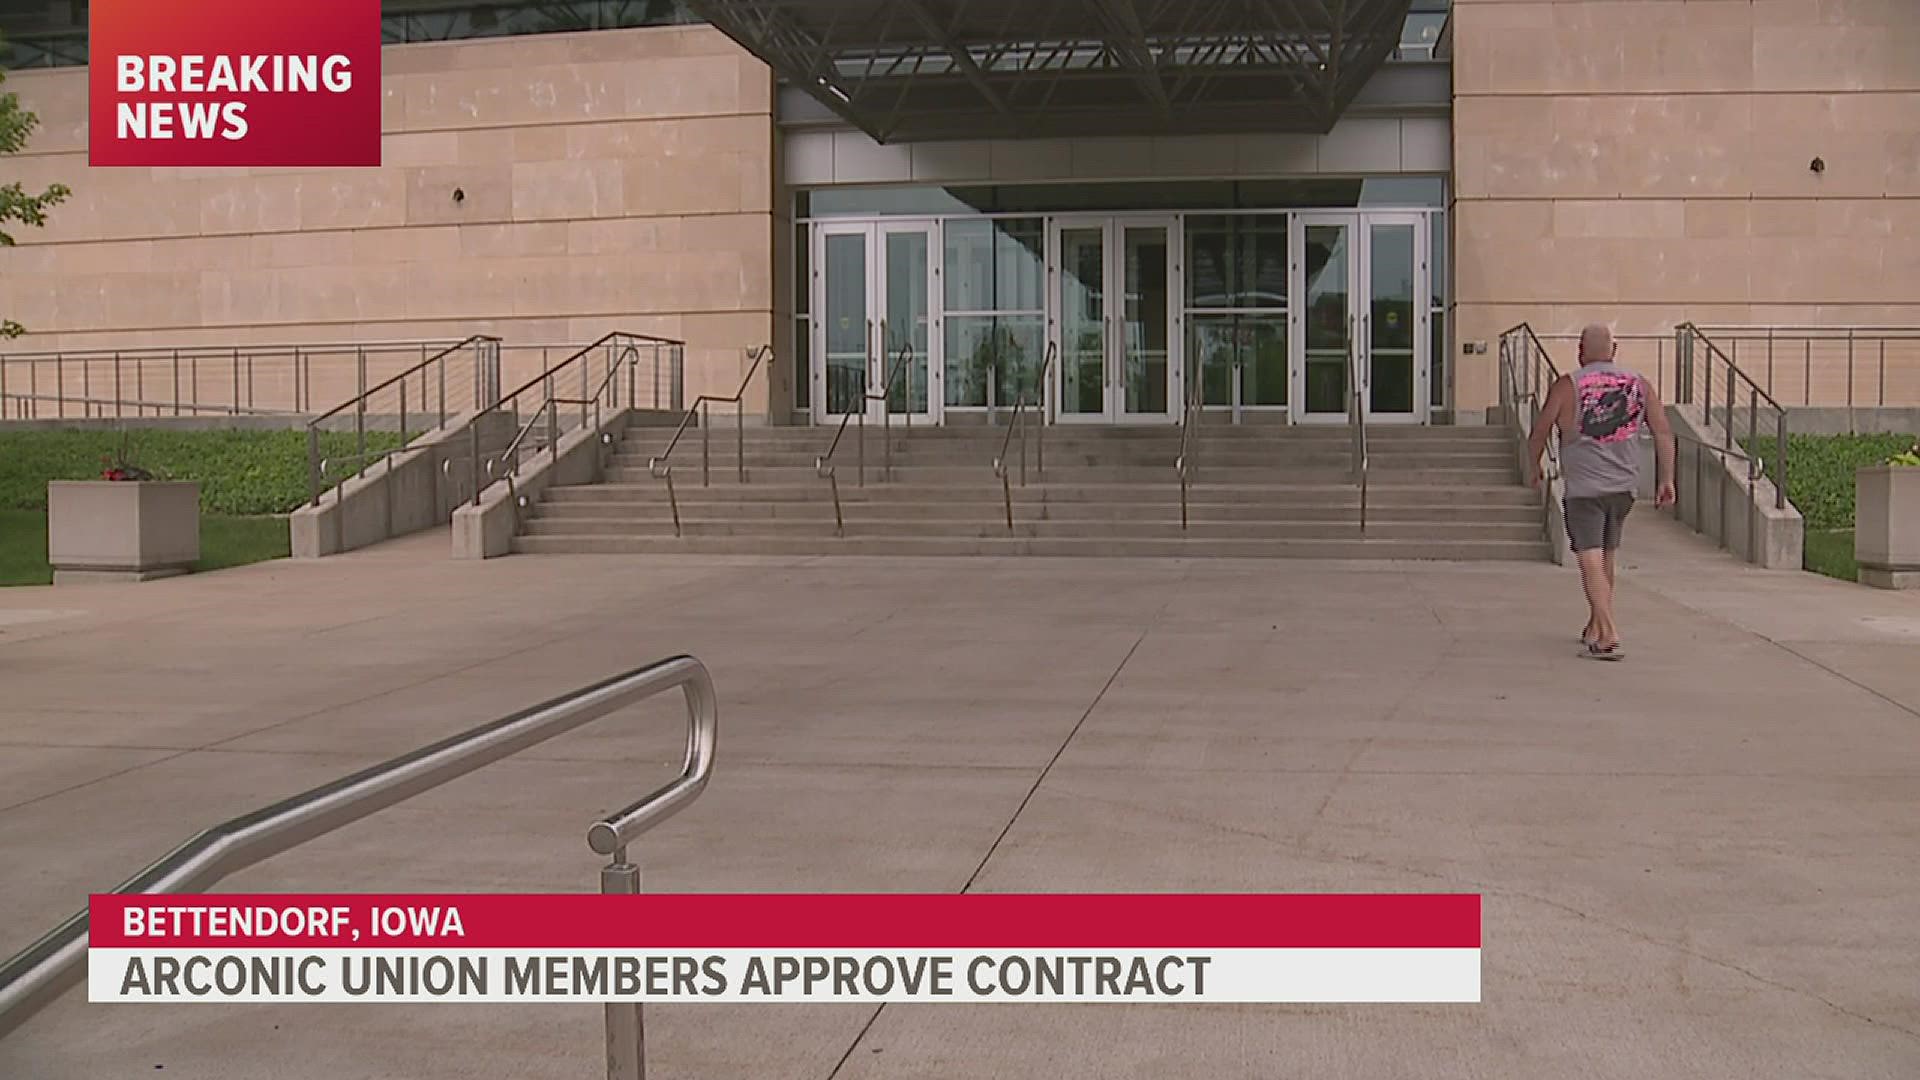 Union members passed a 60-40 vote Wednesday to accept a new four-year contract from Arconic, USW Local 105 President Patrick Stock confirmed with News 8.